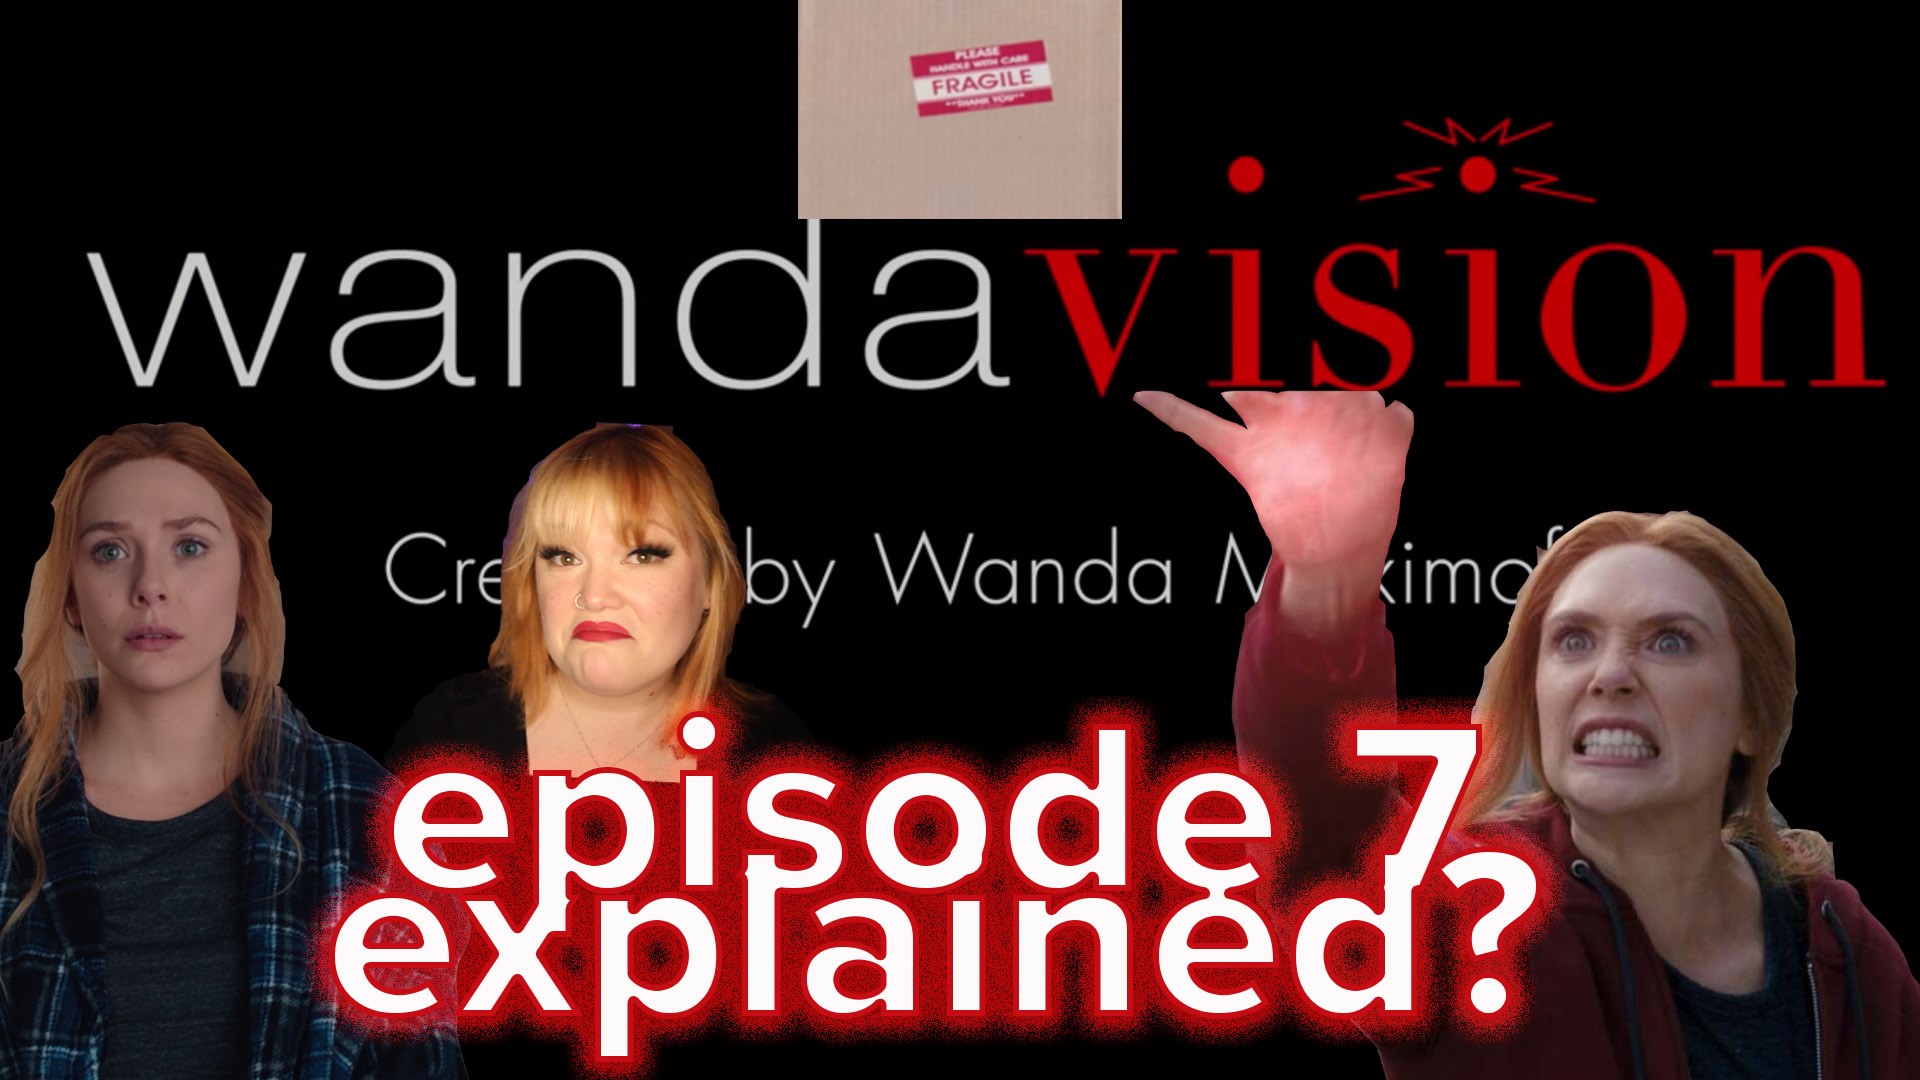 Come speculate wildly with me about what is going on in WandaVision and get caught up before the new episode at youtube.com/nerdnewswithdestiny.